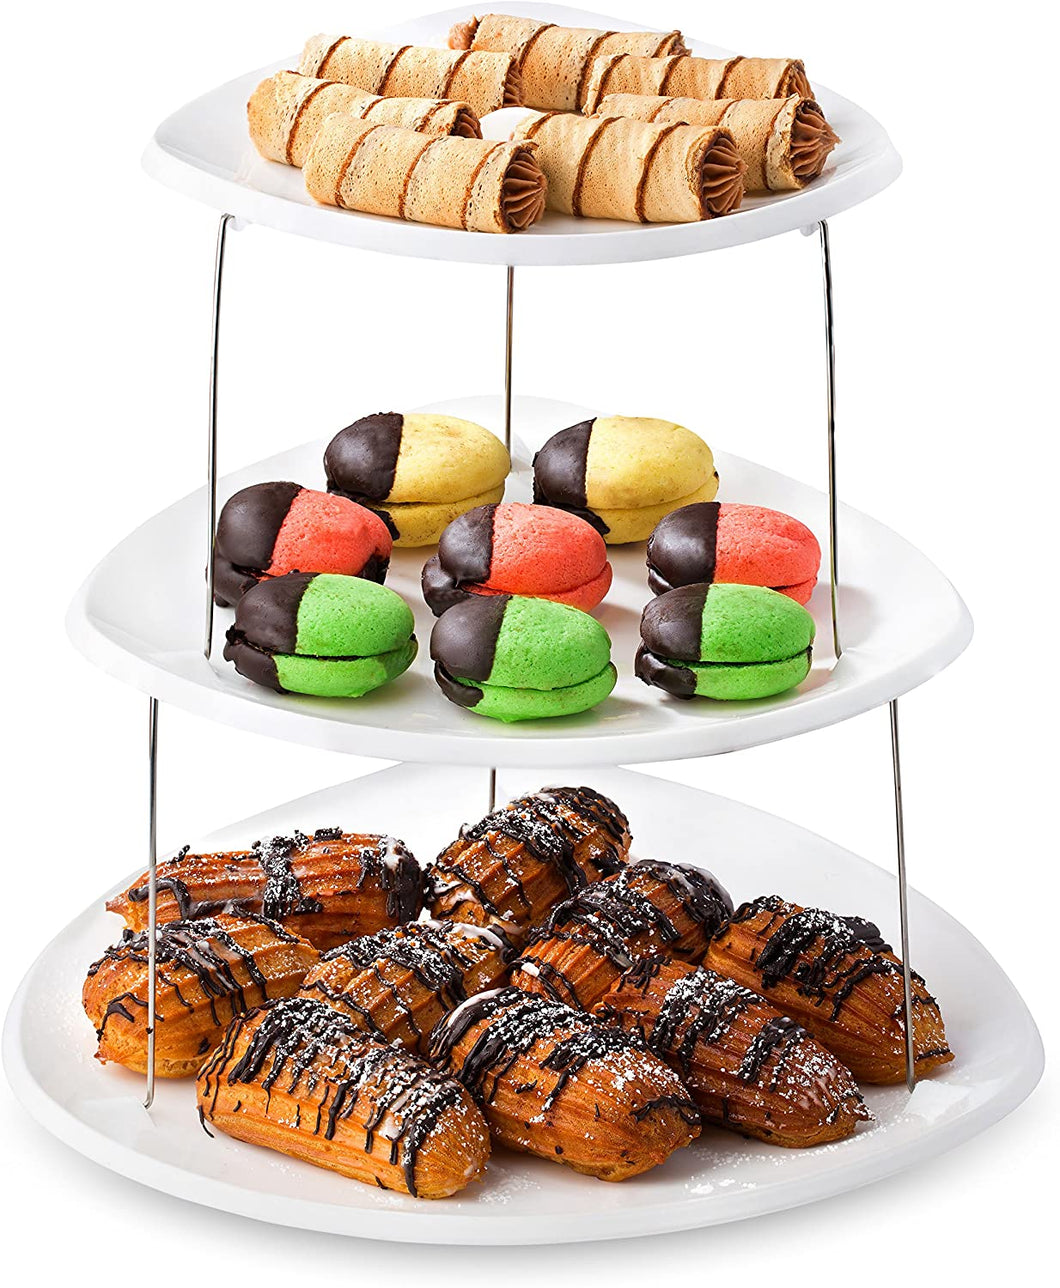 Collapsible Party Tray, 3 Tier - The Decorative Plastic Appetizer Trays Twist Down and Fold Inside for Minimal Storage Space. An Elegant Tray for Serving Sandwiches, Cake, Sliced Cheese and Deli Meat